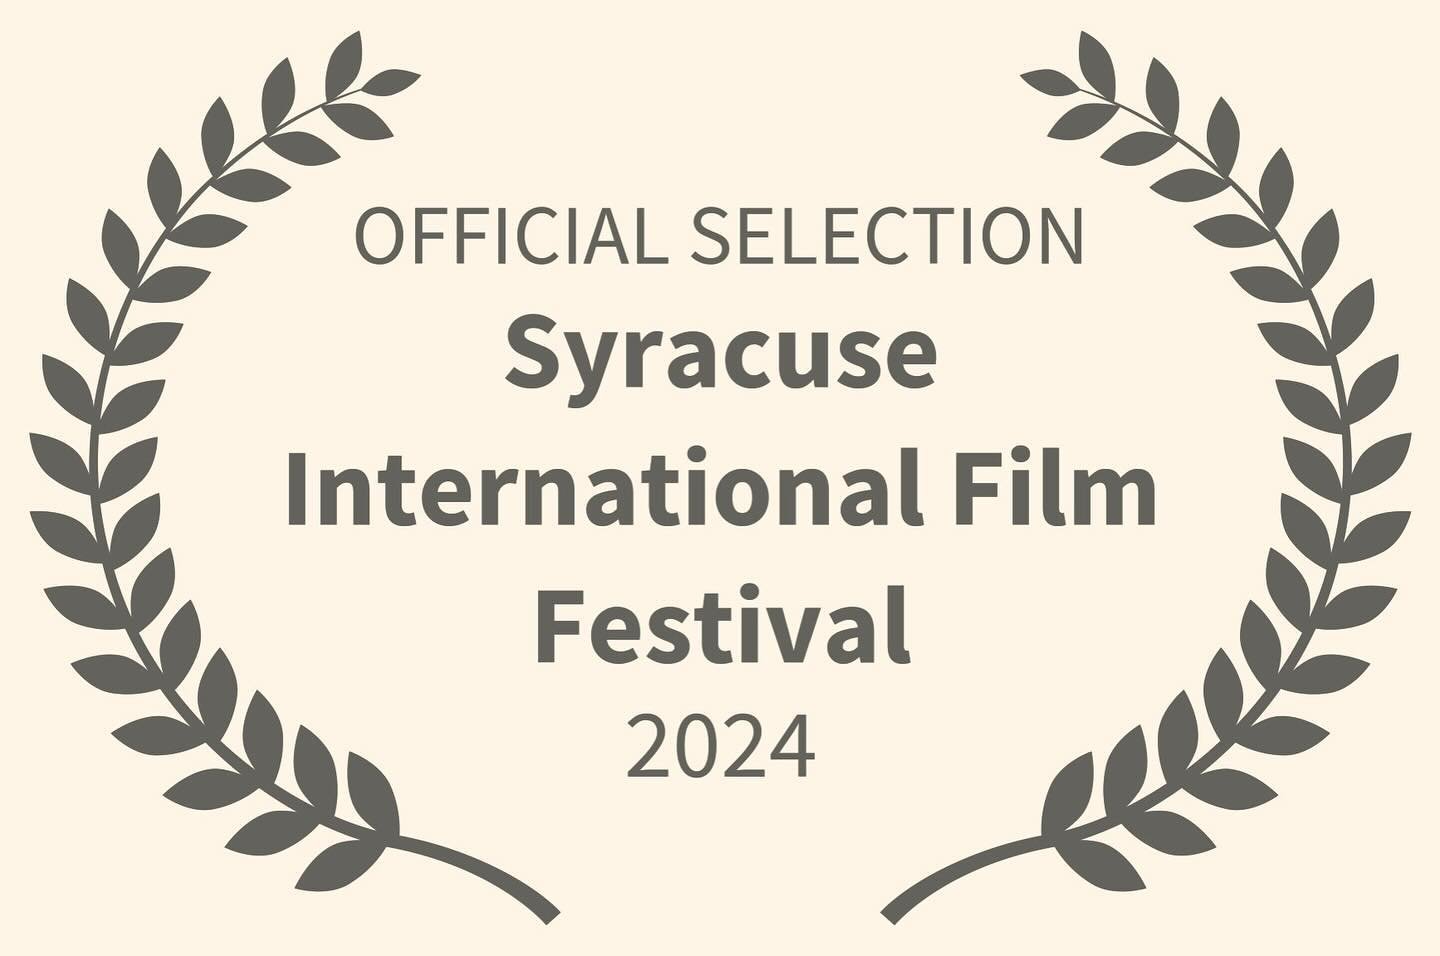 We&rsquo;re pleased to announce that @theatlantispuzzle has been named an official selection of the @syracuseinternationalfilmfest taking place September 20-22 in upstate New York! 

Our international cast and crew features some of the same core team